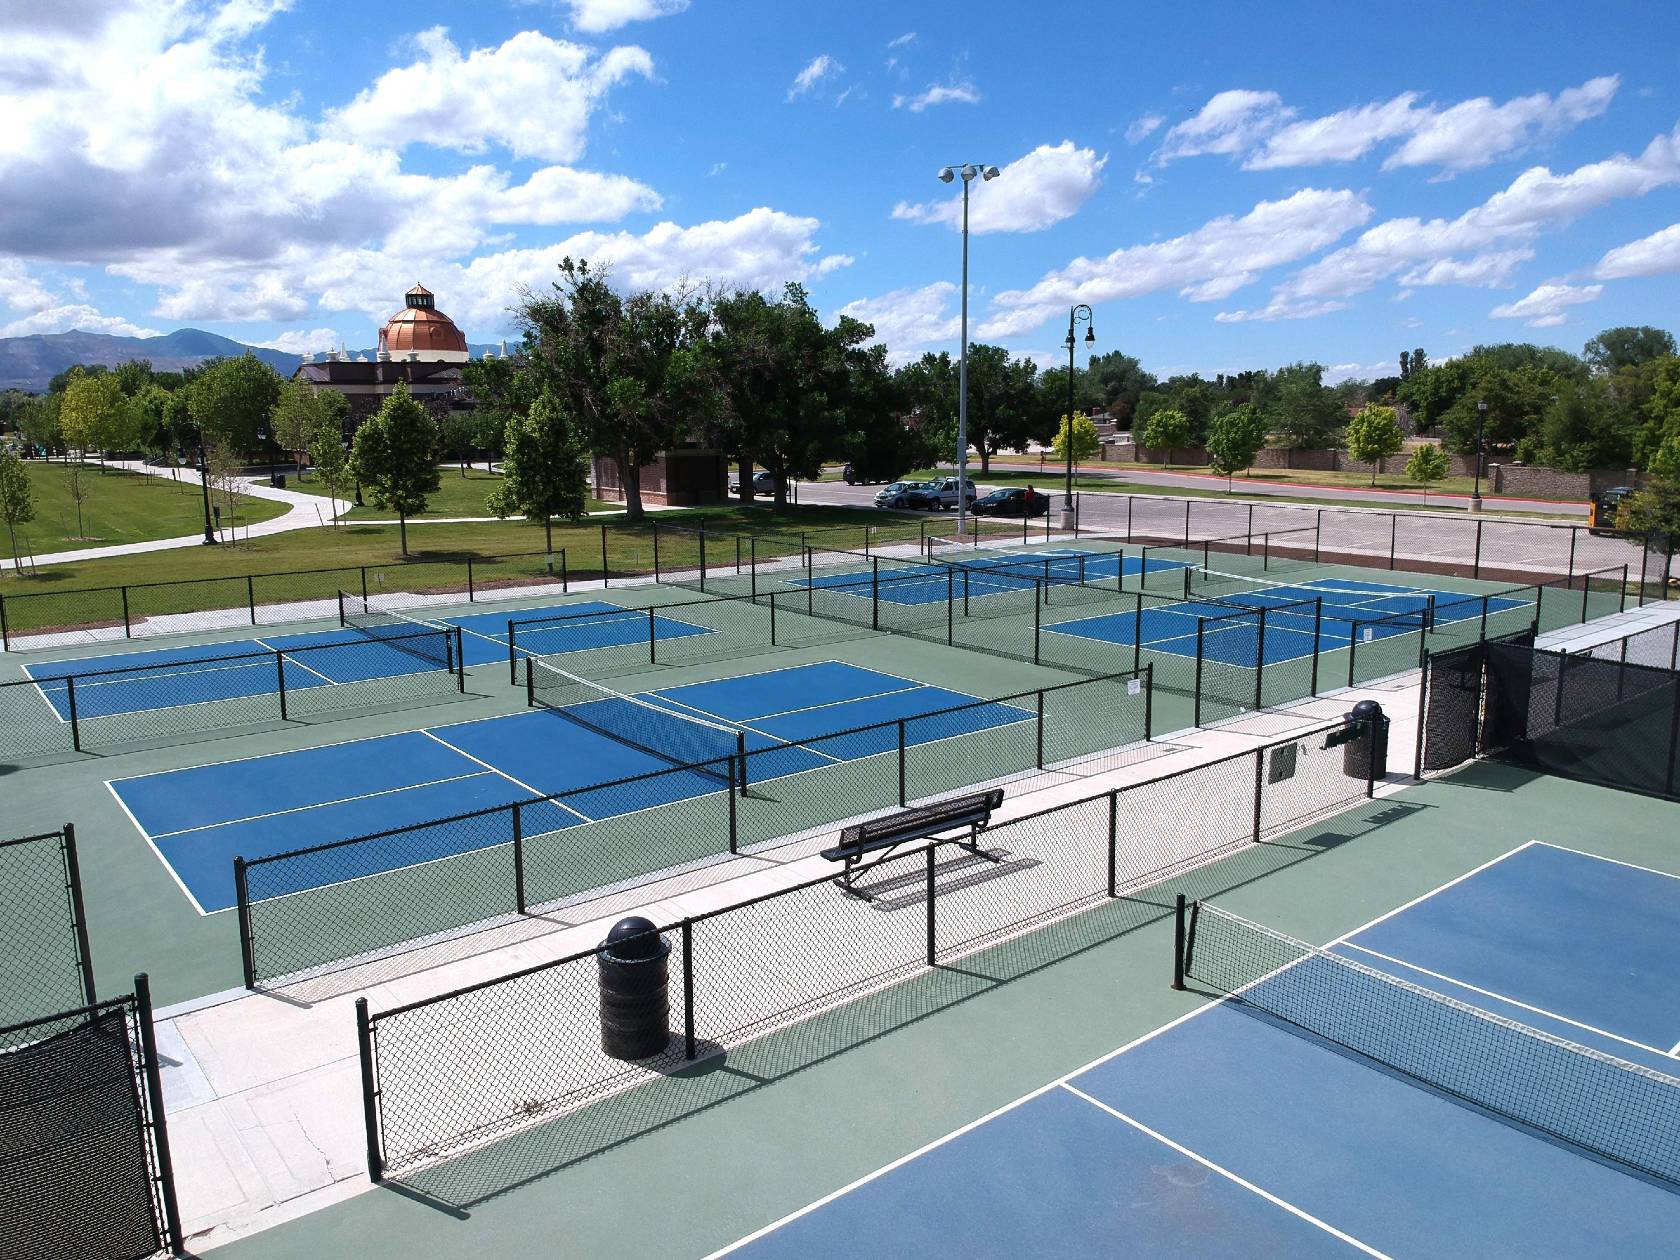 New Pickleball Courts - Copy